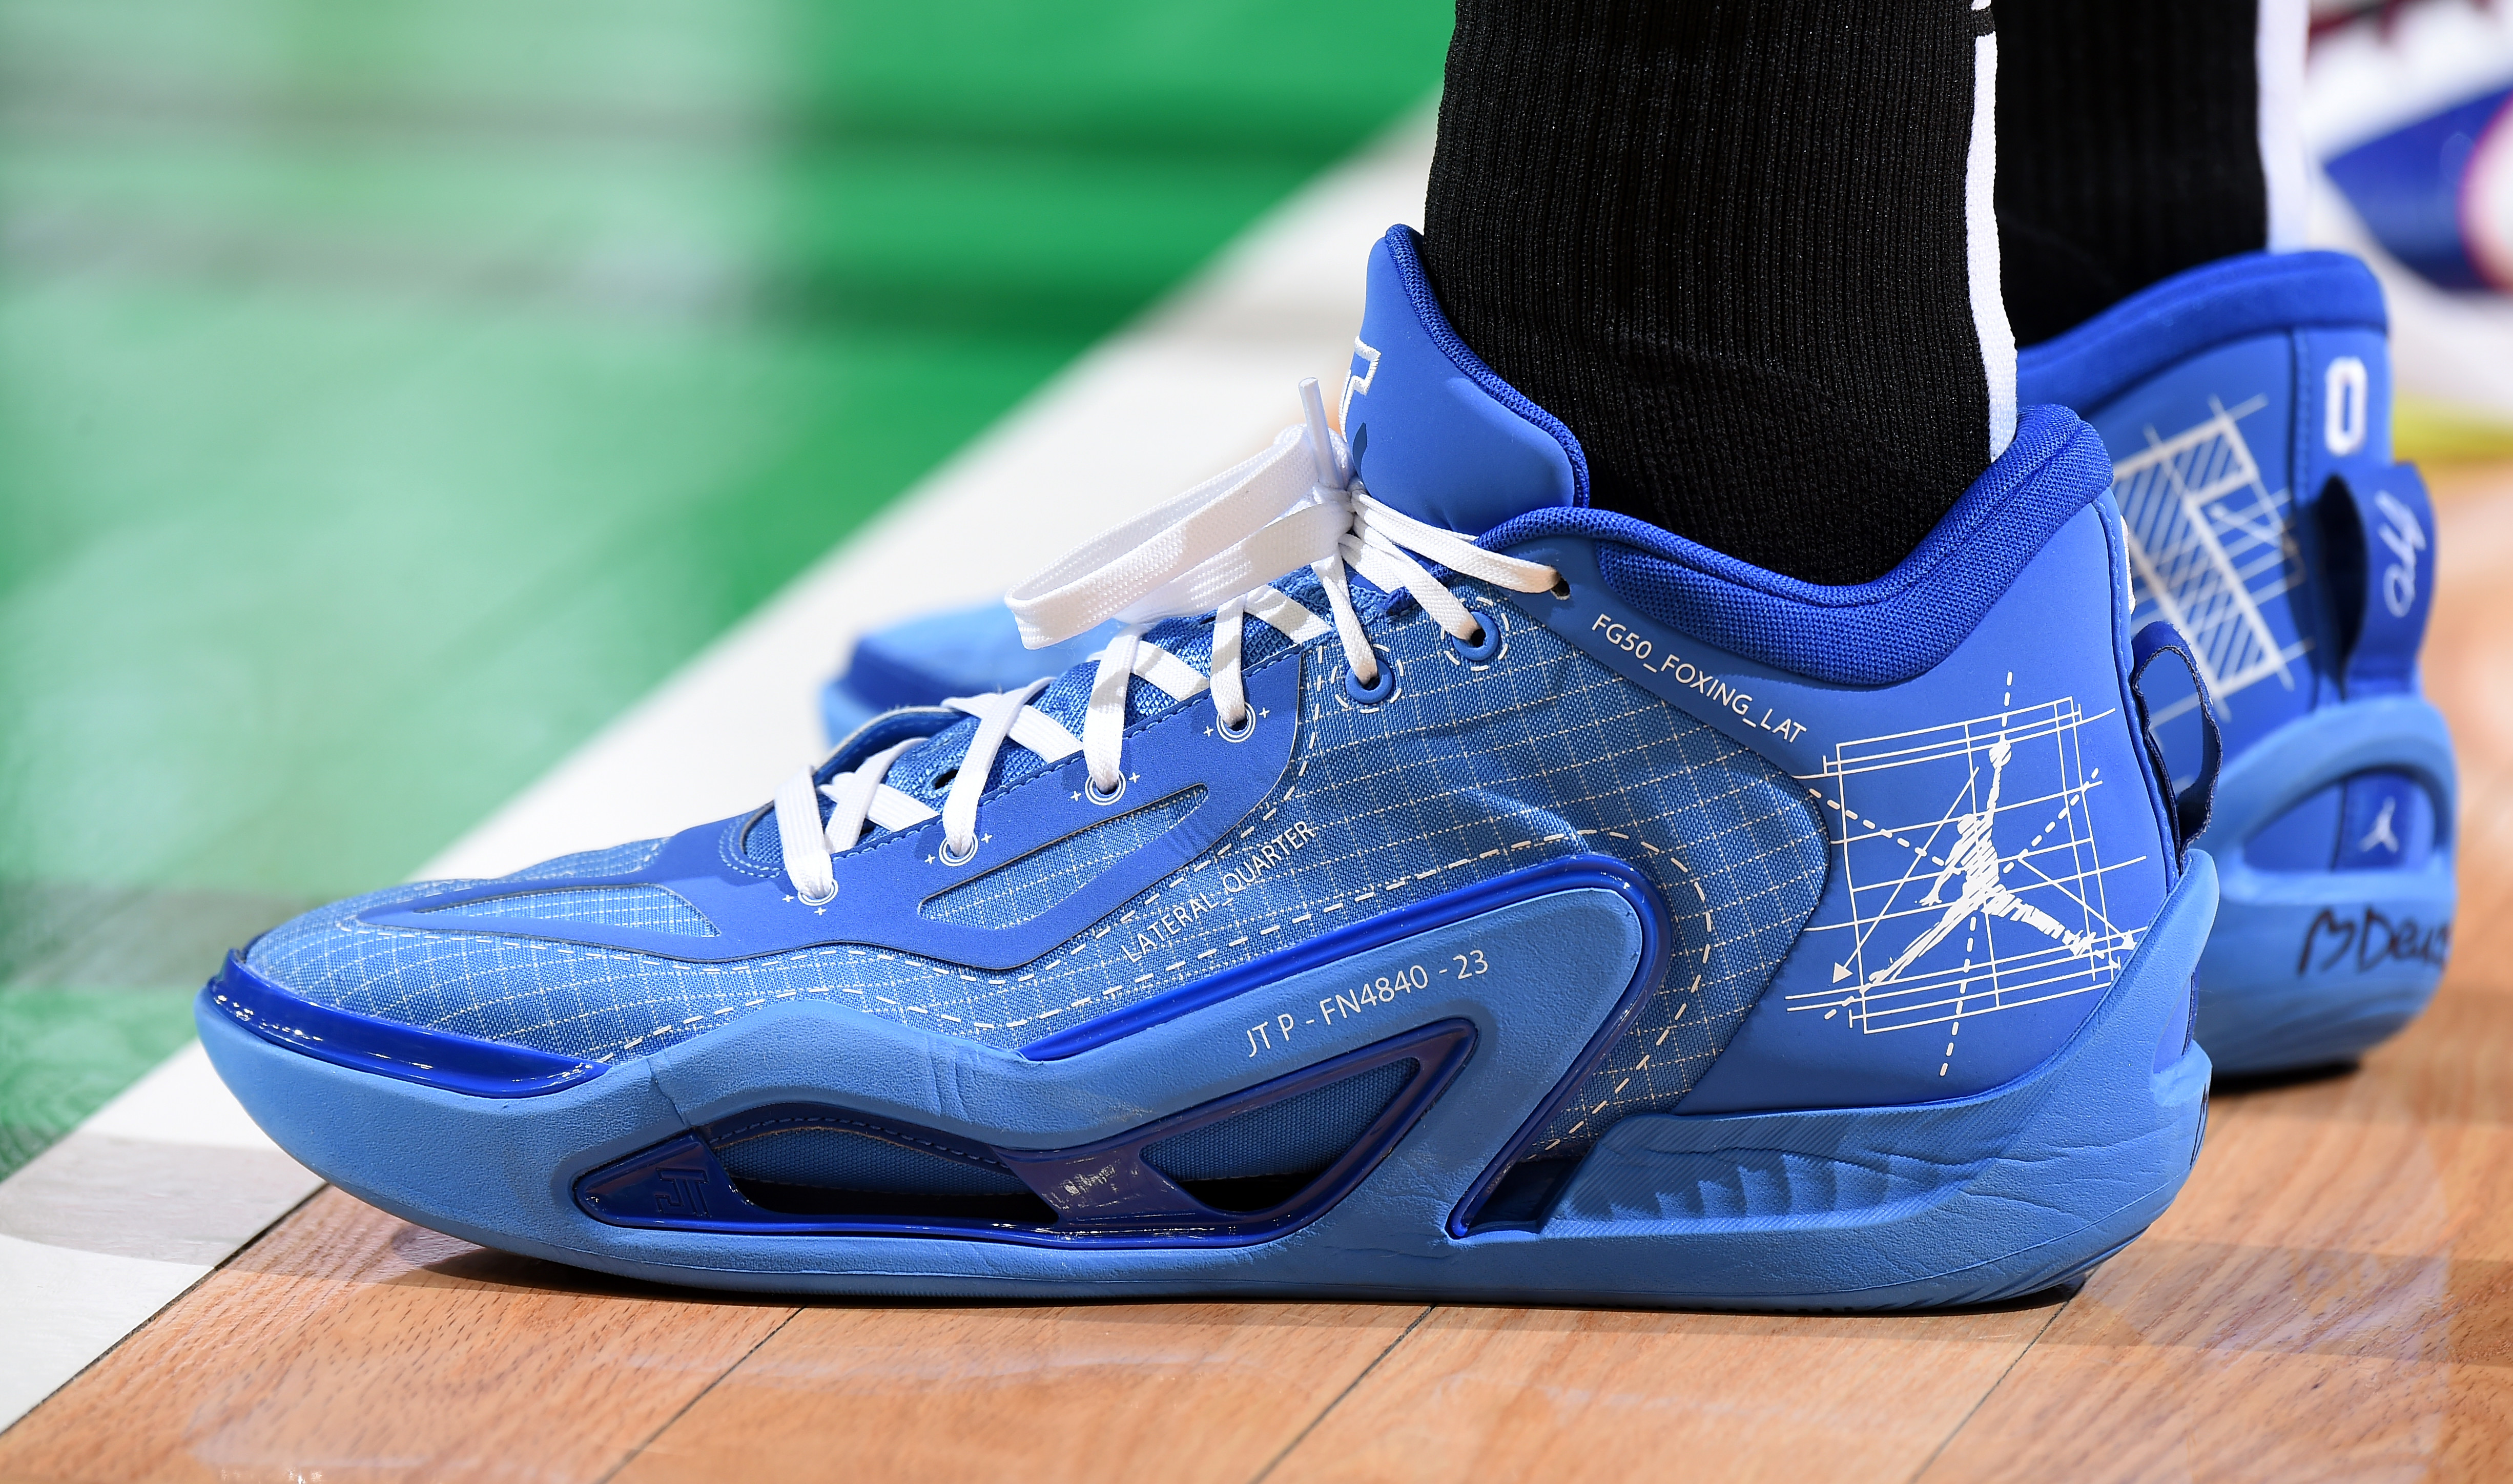 Basketball Shoes NBA Players Are Wearing Today